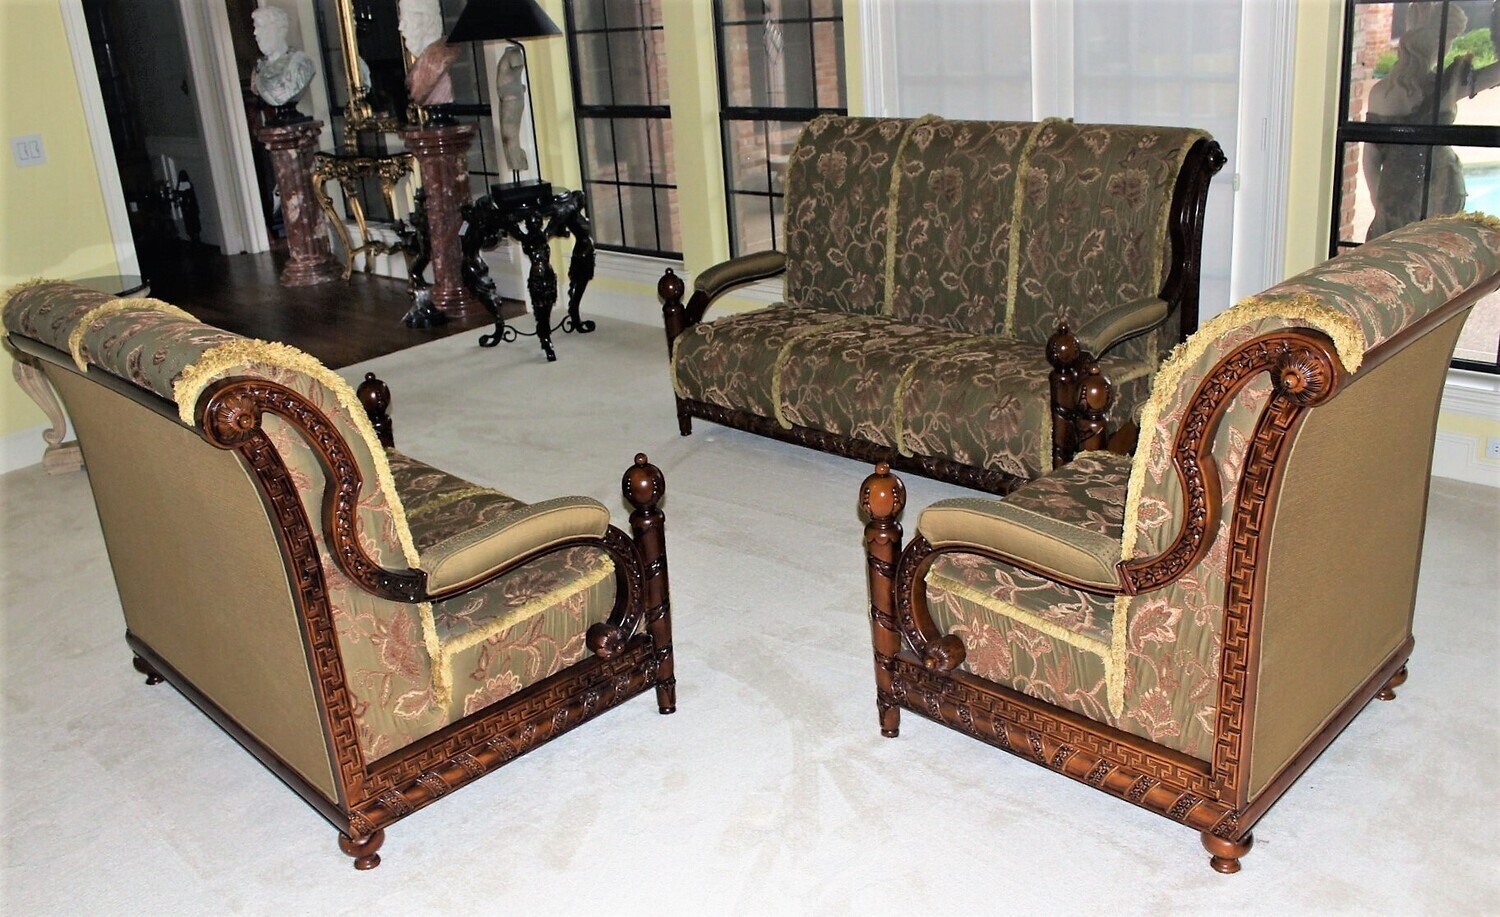 Antique Heavily Carved Upholstered Loveseat, Settee and Armchair Parlour Suite